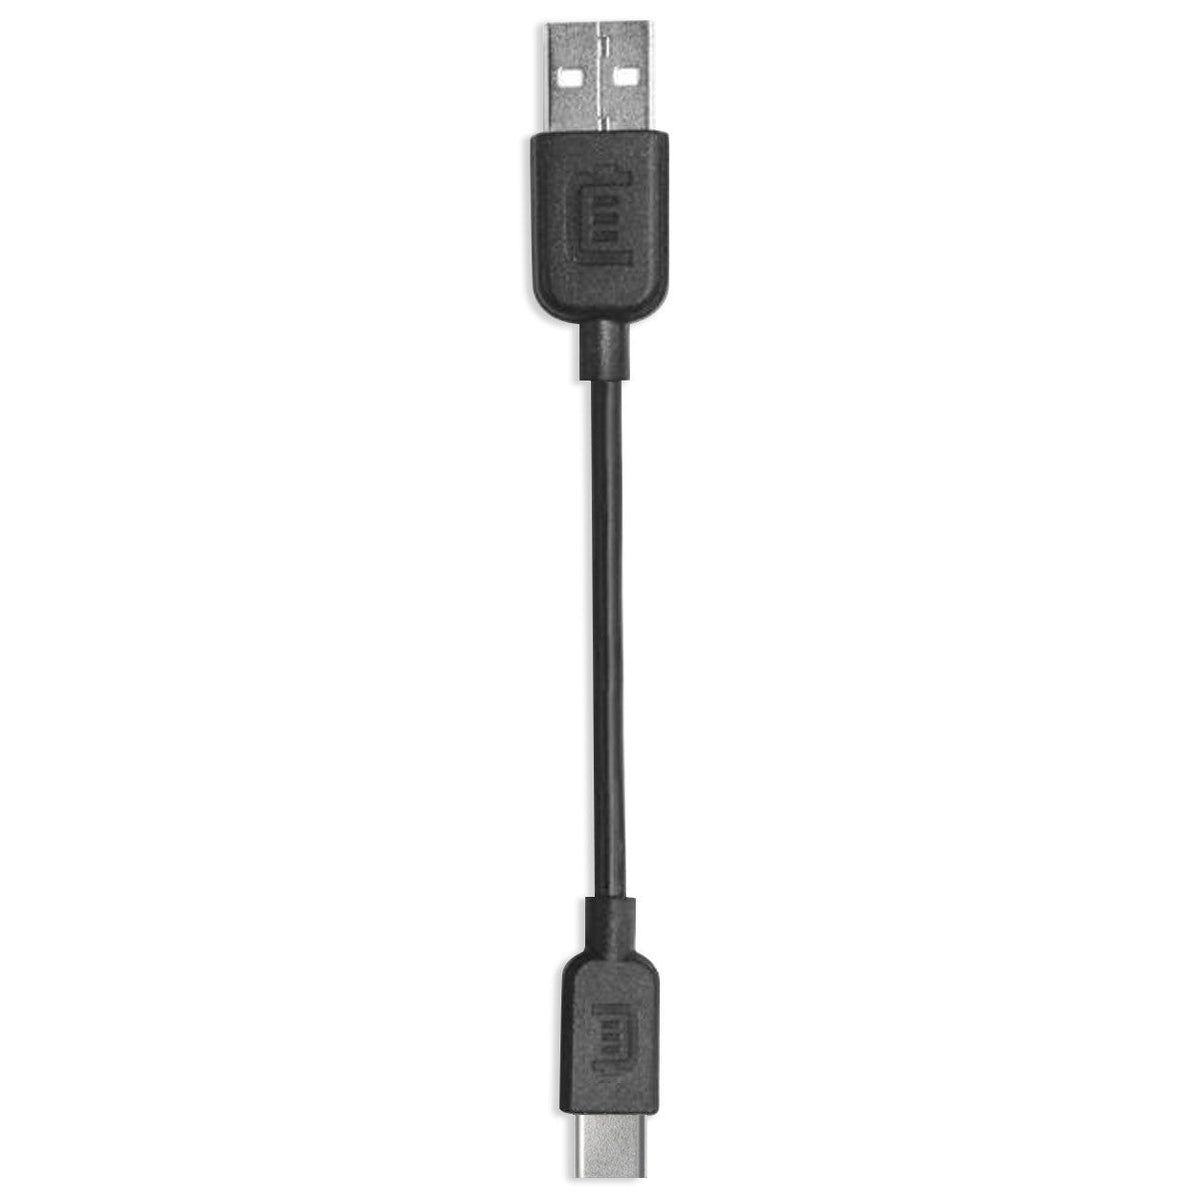 USB-C to USB Recharge Cable